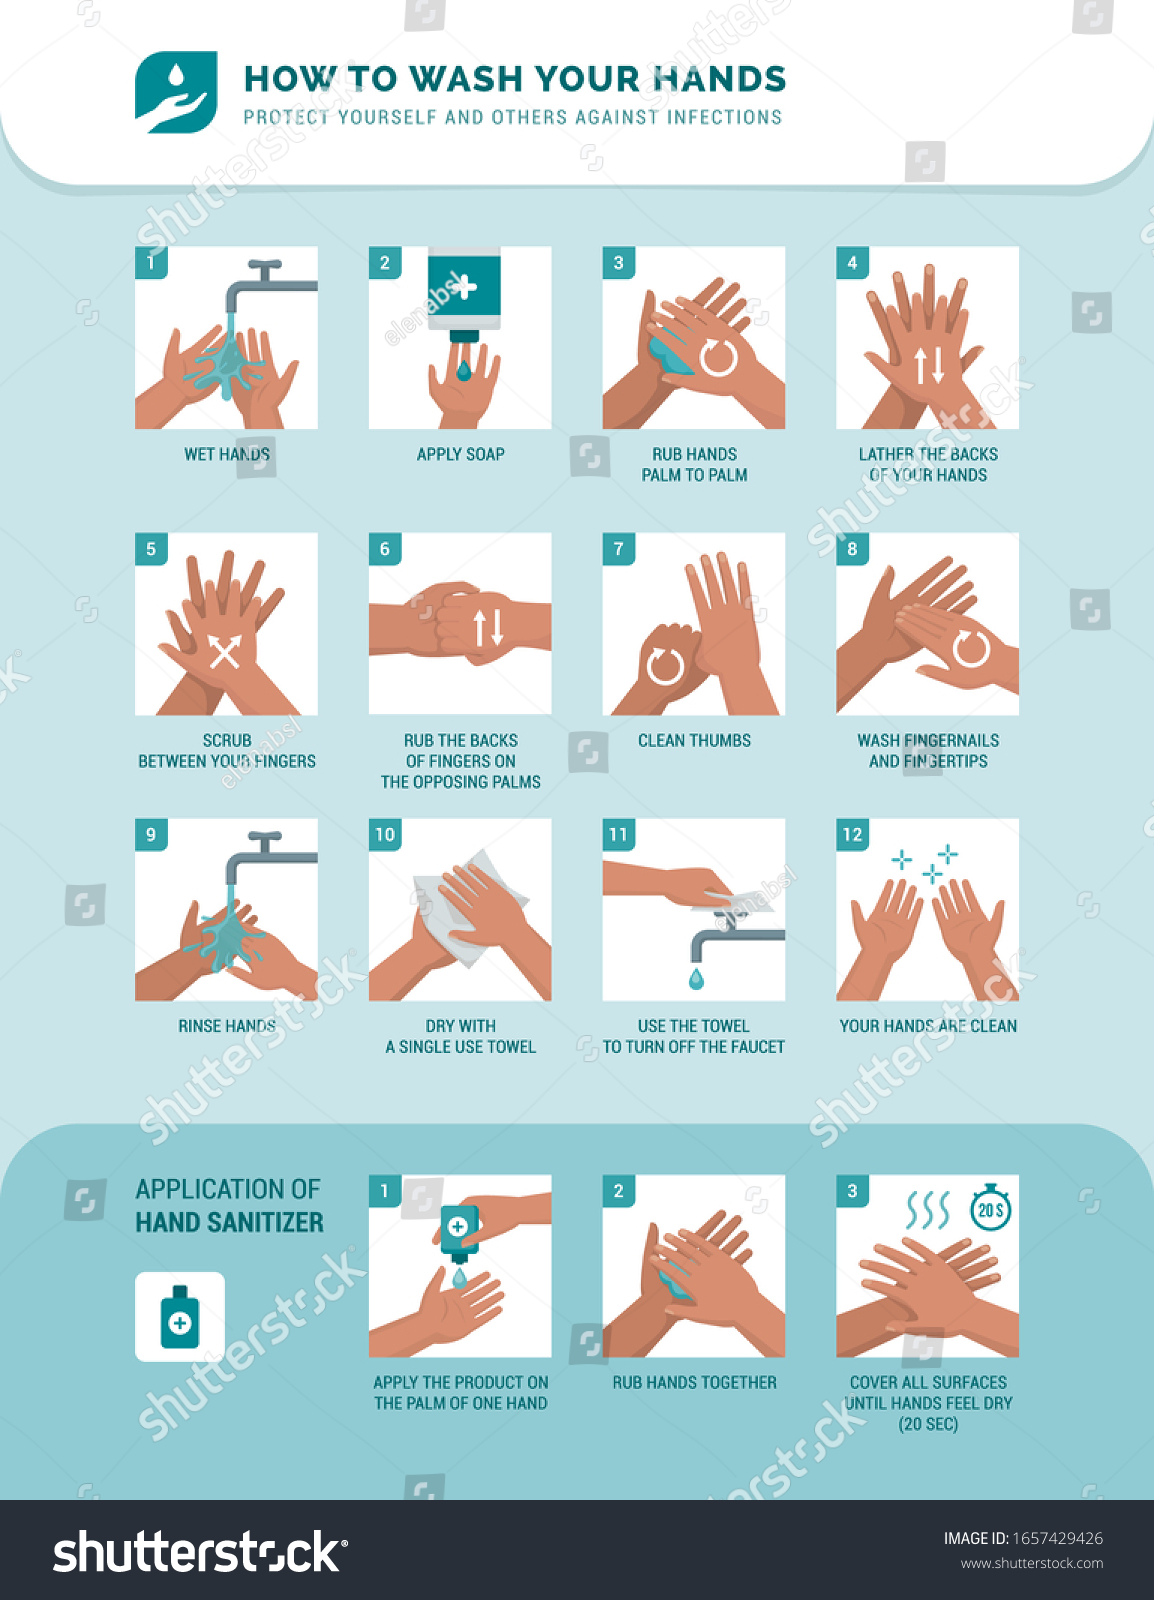 Personal hygiene, disease prevention and healthcare educational infographic: how to wash your hands properly step by step and how to use hand sanitizer #1657429426